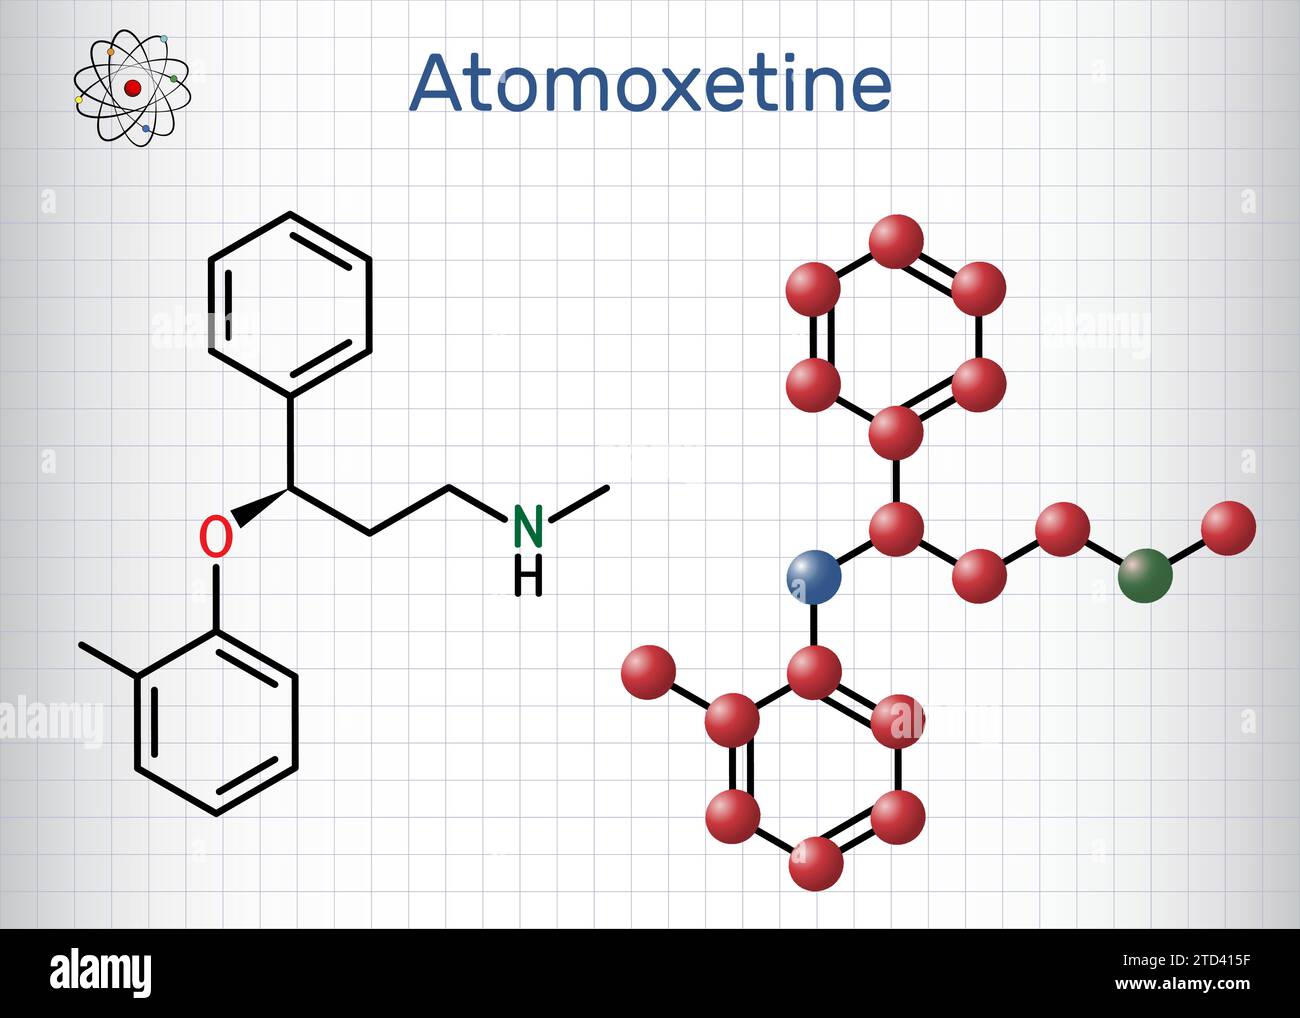 Atomoxetine molecule. Structural chemical formula, molecule model. Sheet of paper in a cage. Stock Vector